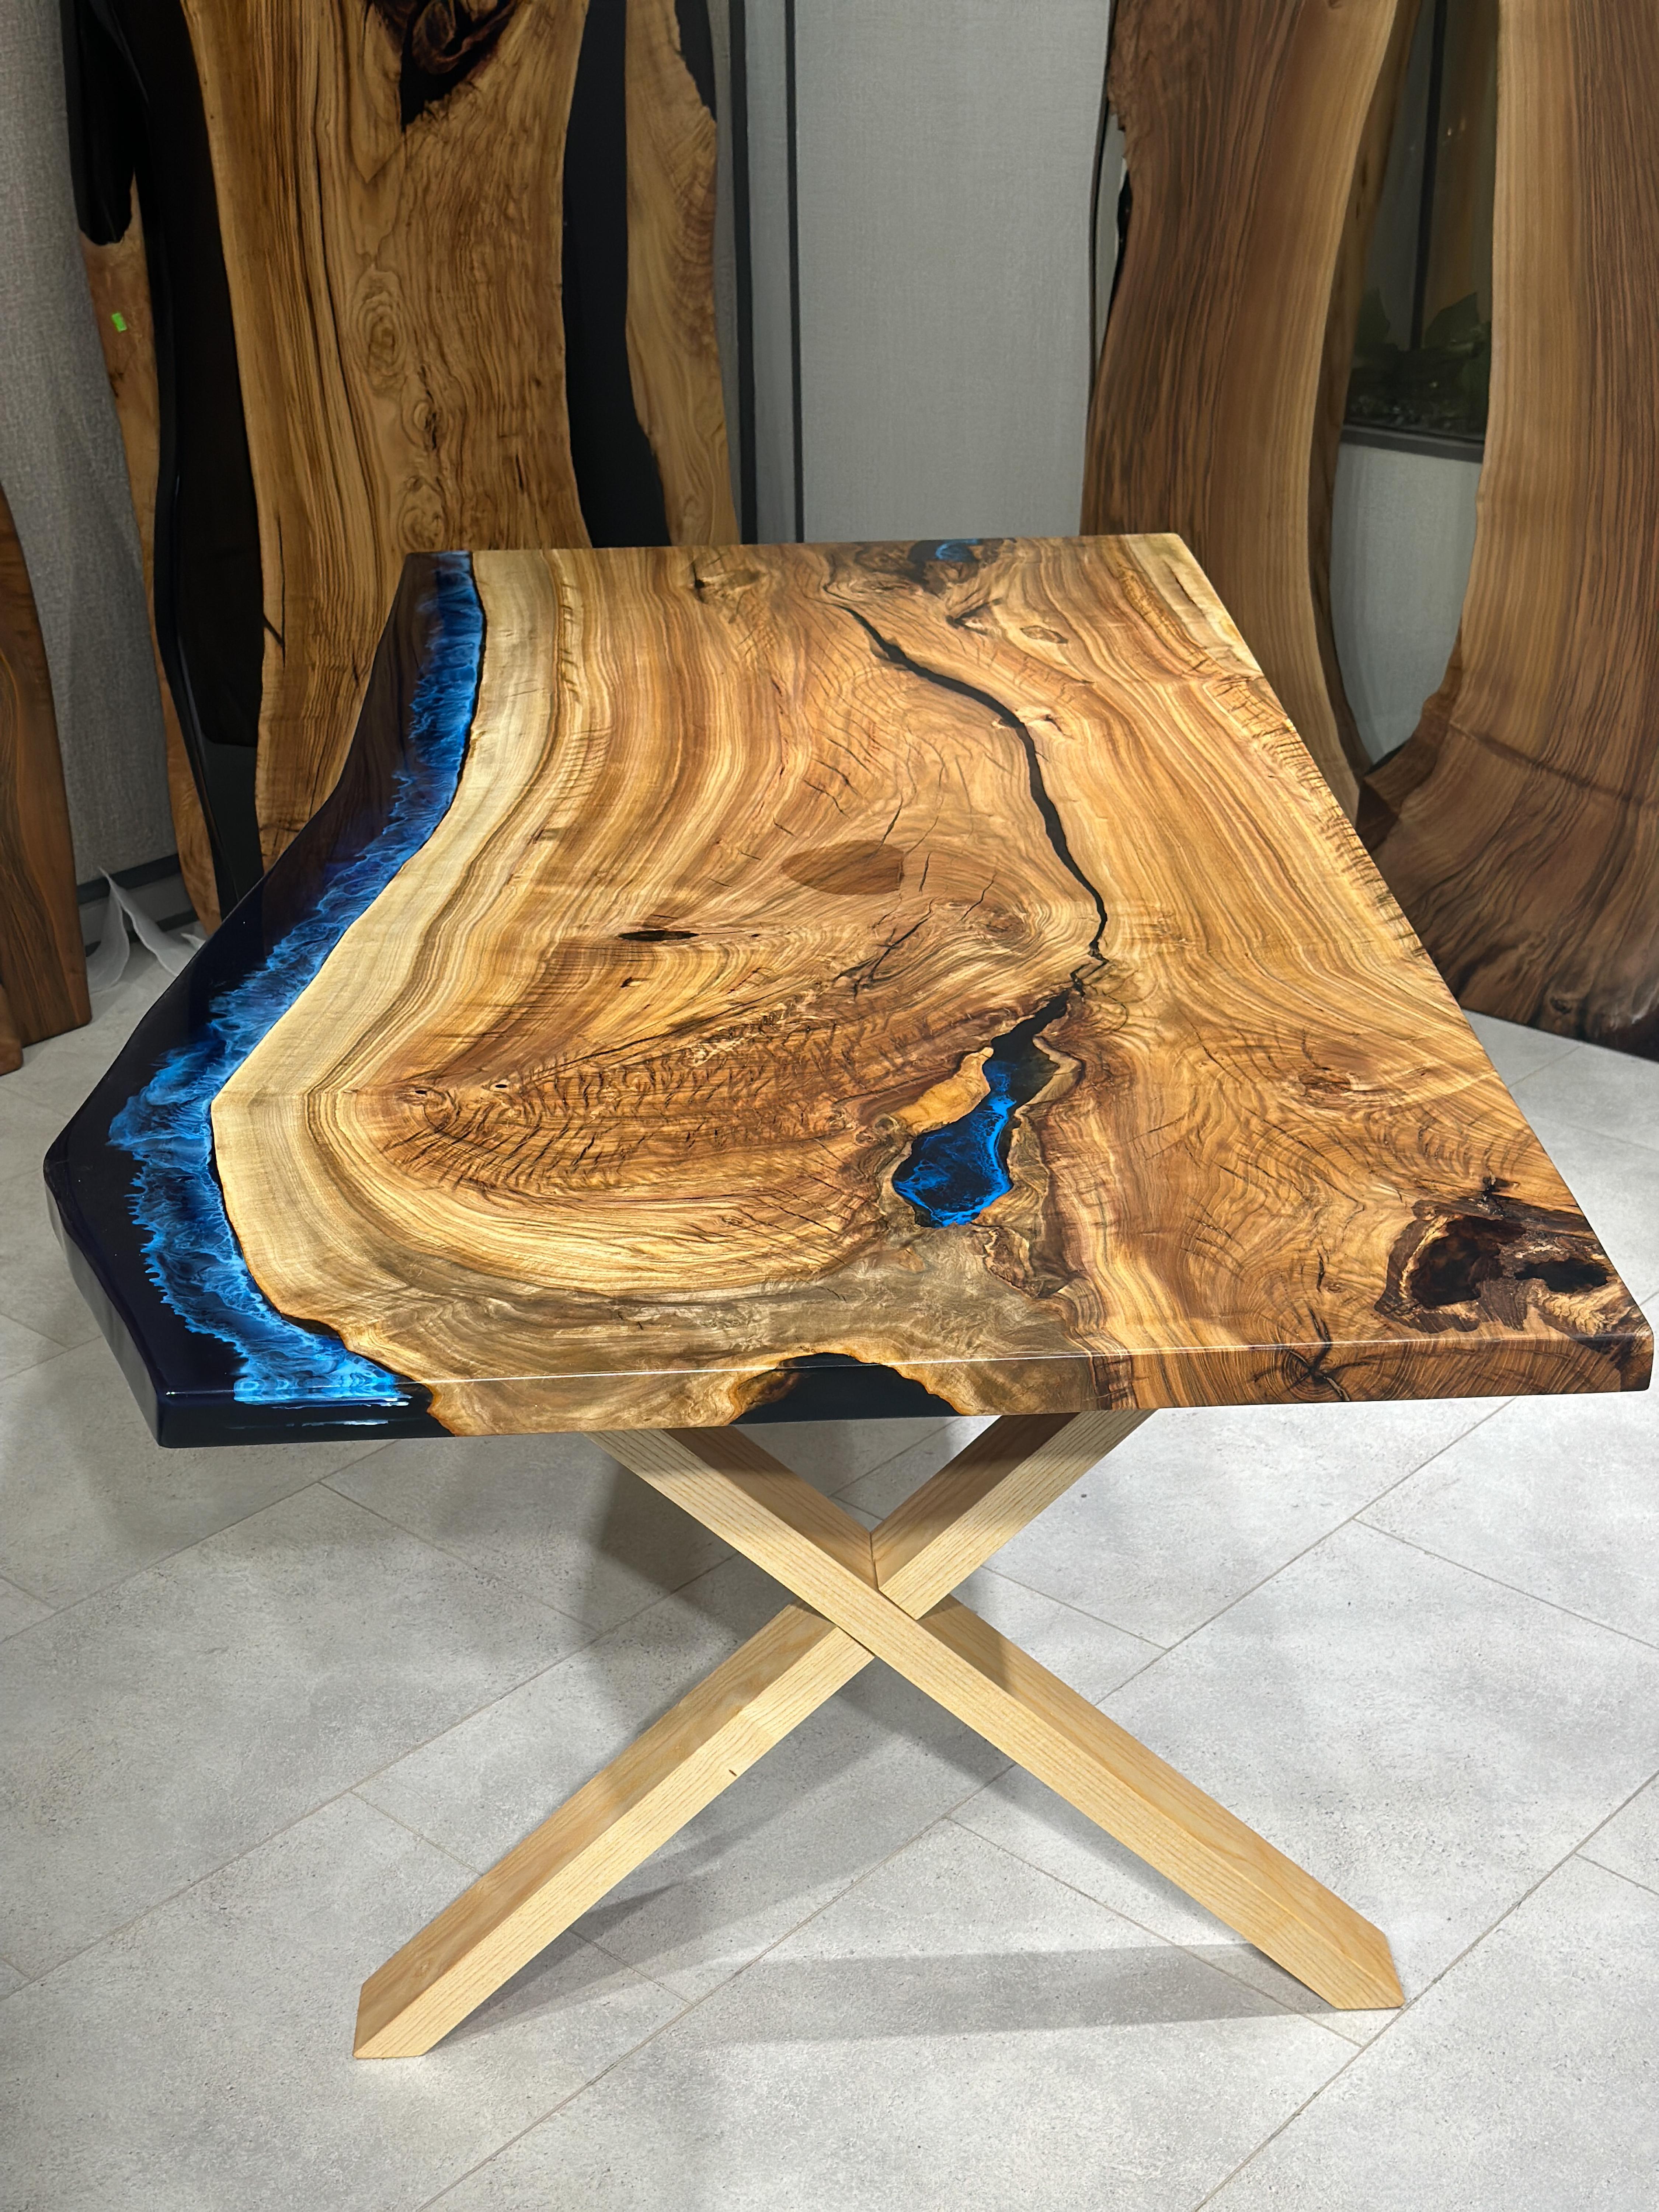 Custom Gumwood Live Edge Epoxy Resin Dining Table 

This table is made of Gumwood. The grains and texture of the wood describe what a natural walnut woods looks like.
It can be used as a dining table or as a conference table. Suitable for indoor